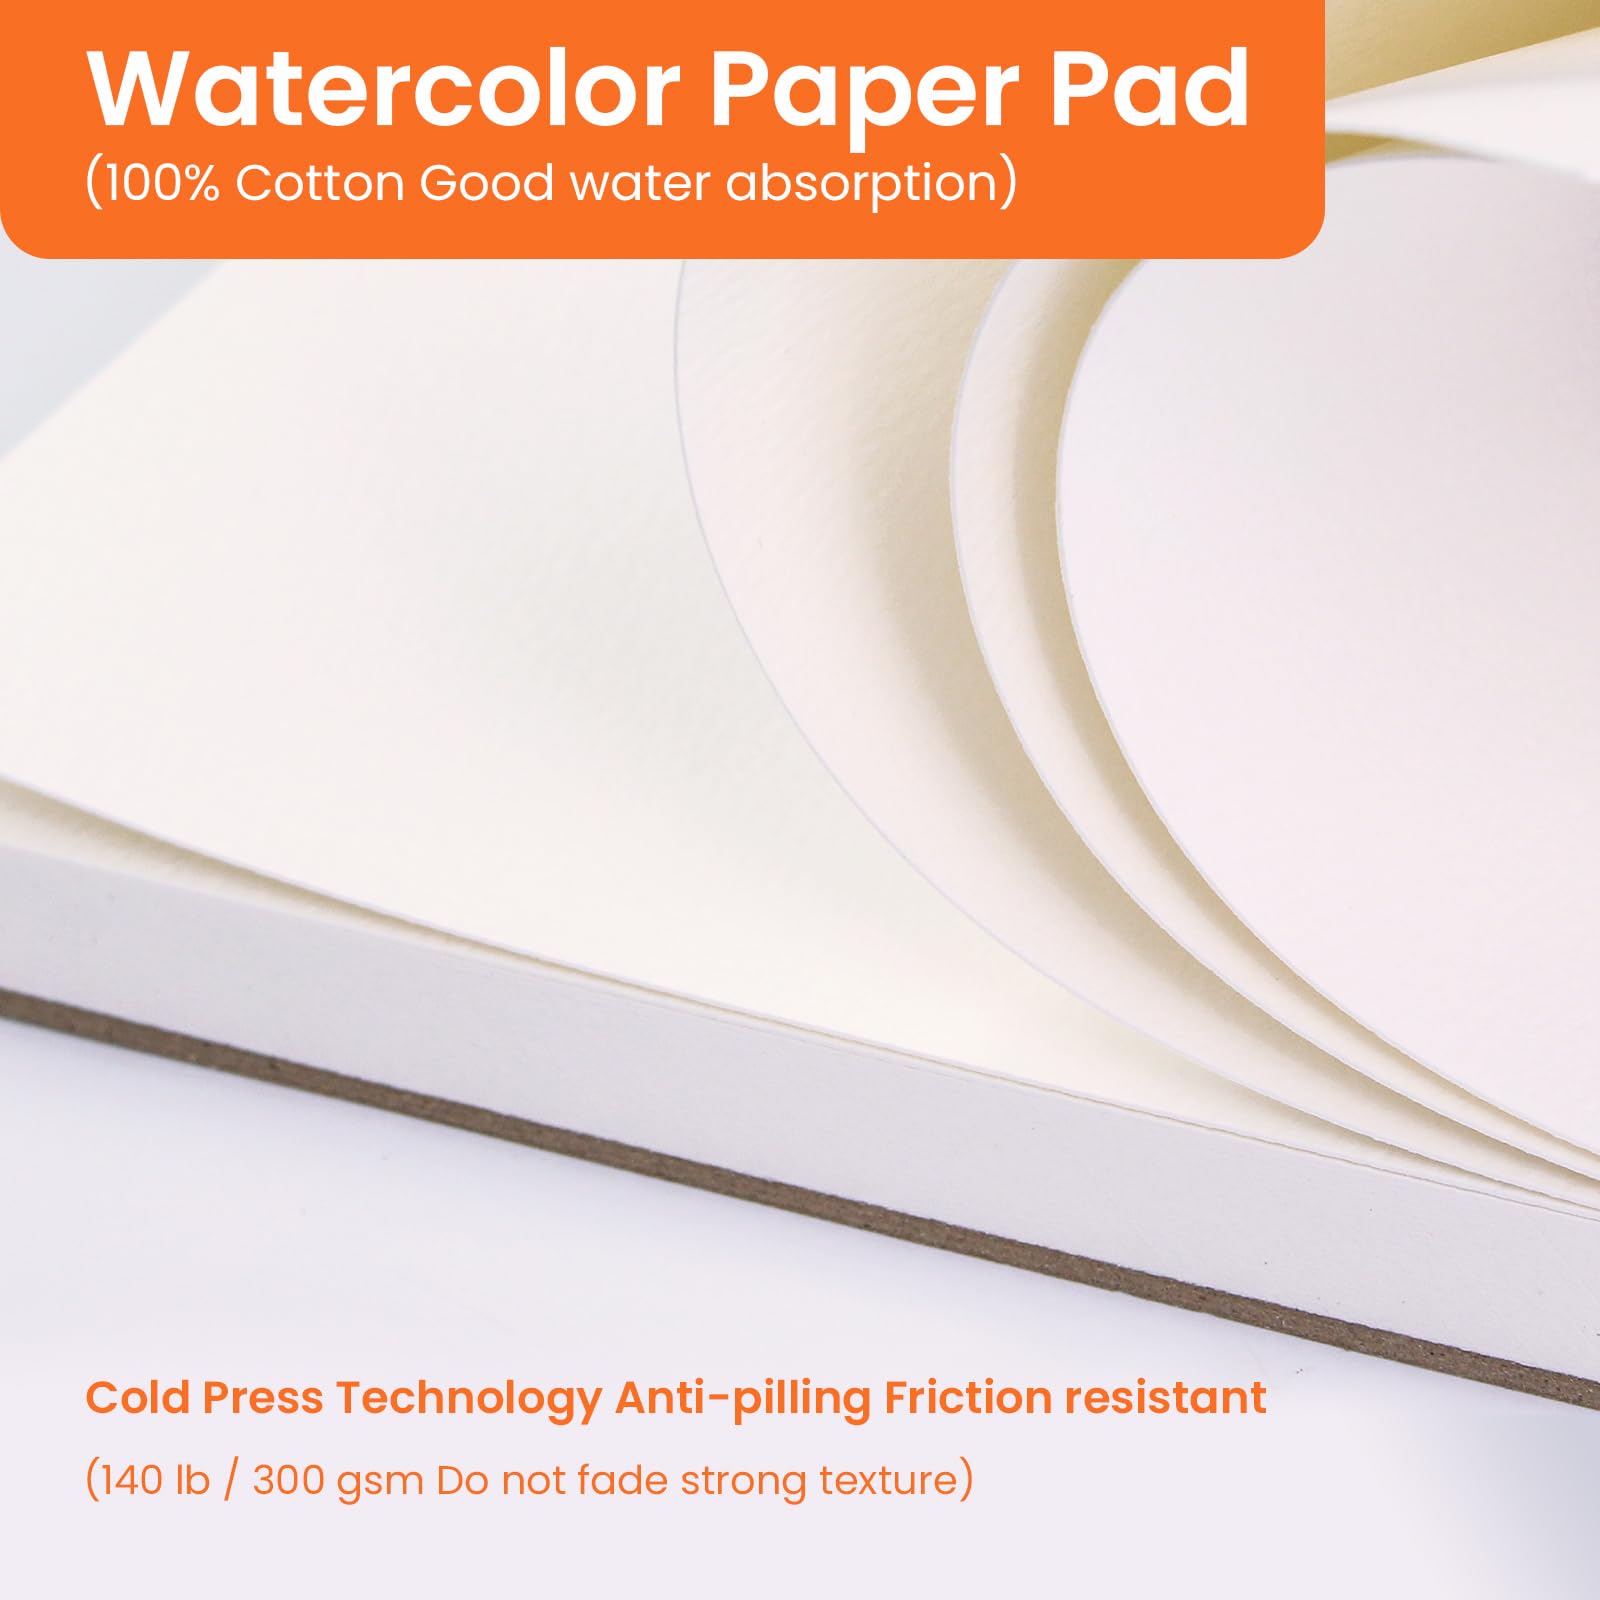 Watercolor Paper Pad, 30 Sheets, 5x7”, 100% Cotton Paper, Glue Bound, 140LB/300GSM Cold Pressed Water Color Paper for Watercolor Drawing, Mixed Media, Art Journaling (5x7 Inch)